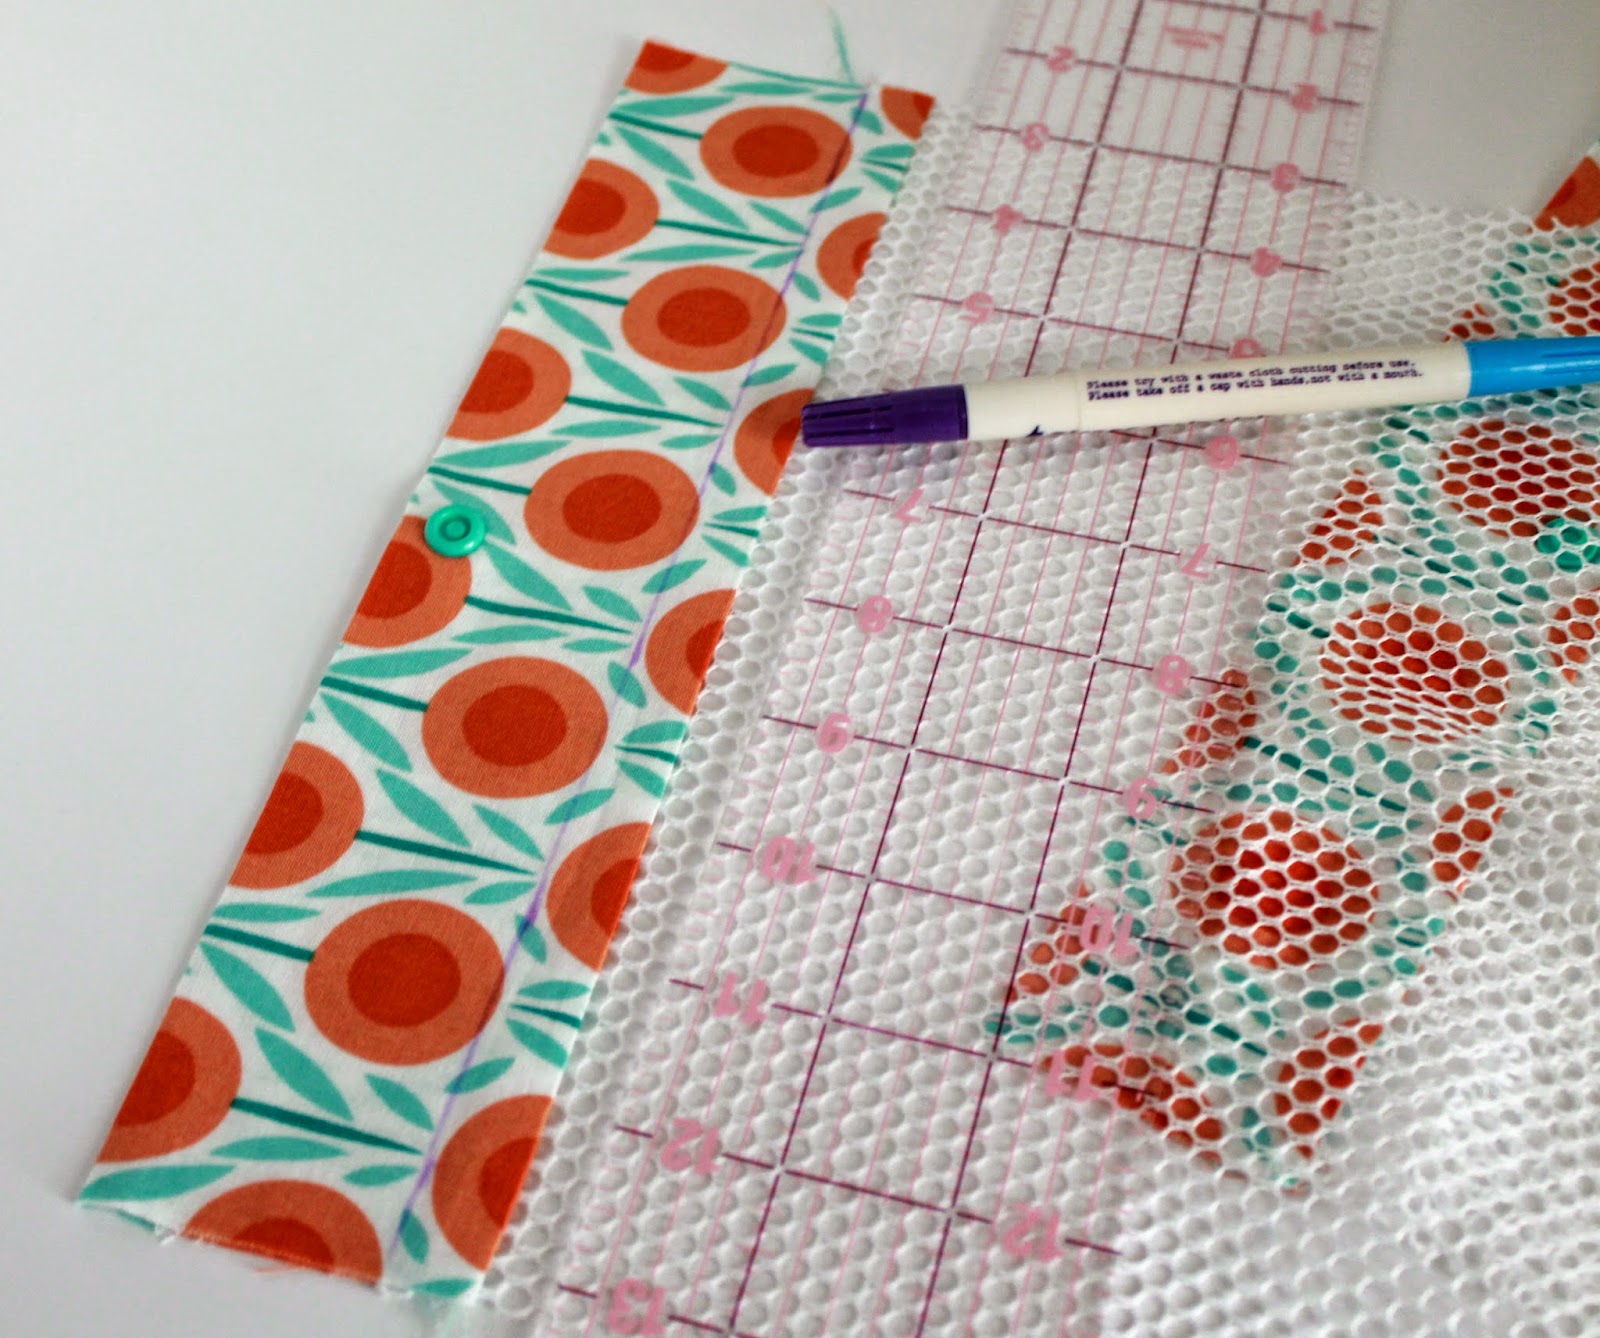 Simple Mesh Bag Tutorial | Step by step directions how to sew a mesh bag with a simple fold-over closure, no zipper. | The Inspired Wren